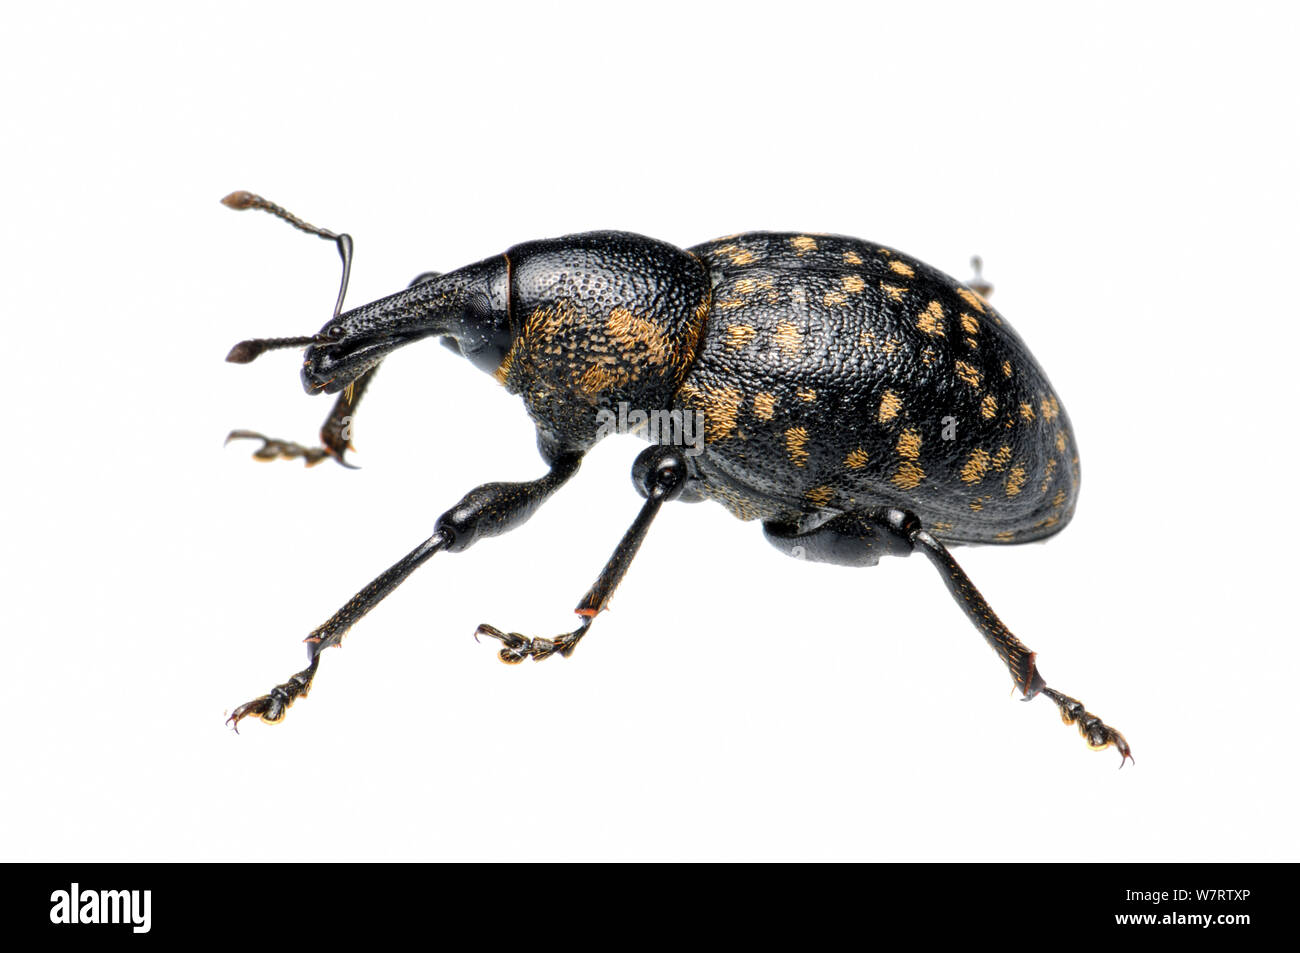 Large Pine Weevil (Hylobius abietis), Slovenia, Europe, July, meetyourneighbours.net project Stock Photo